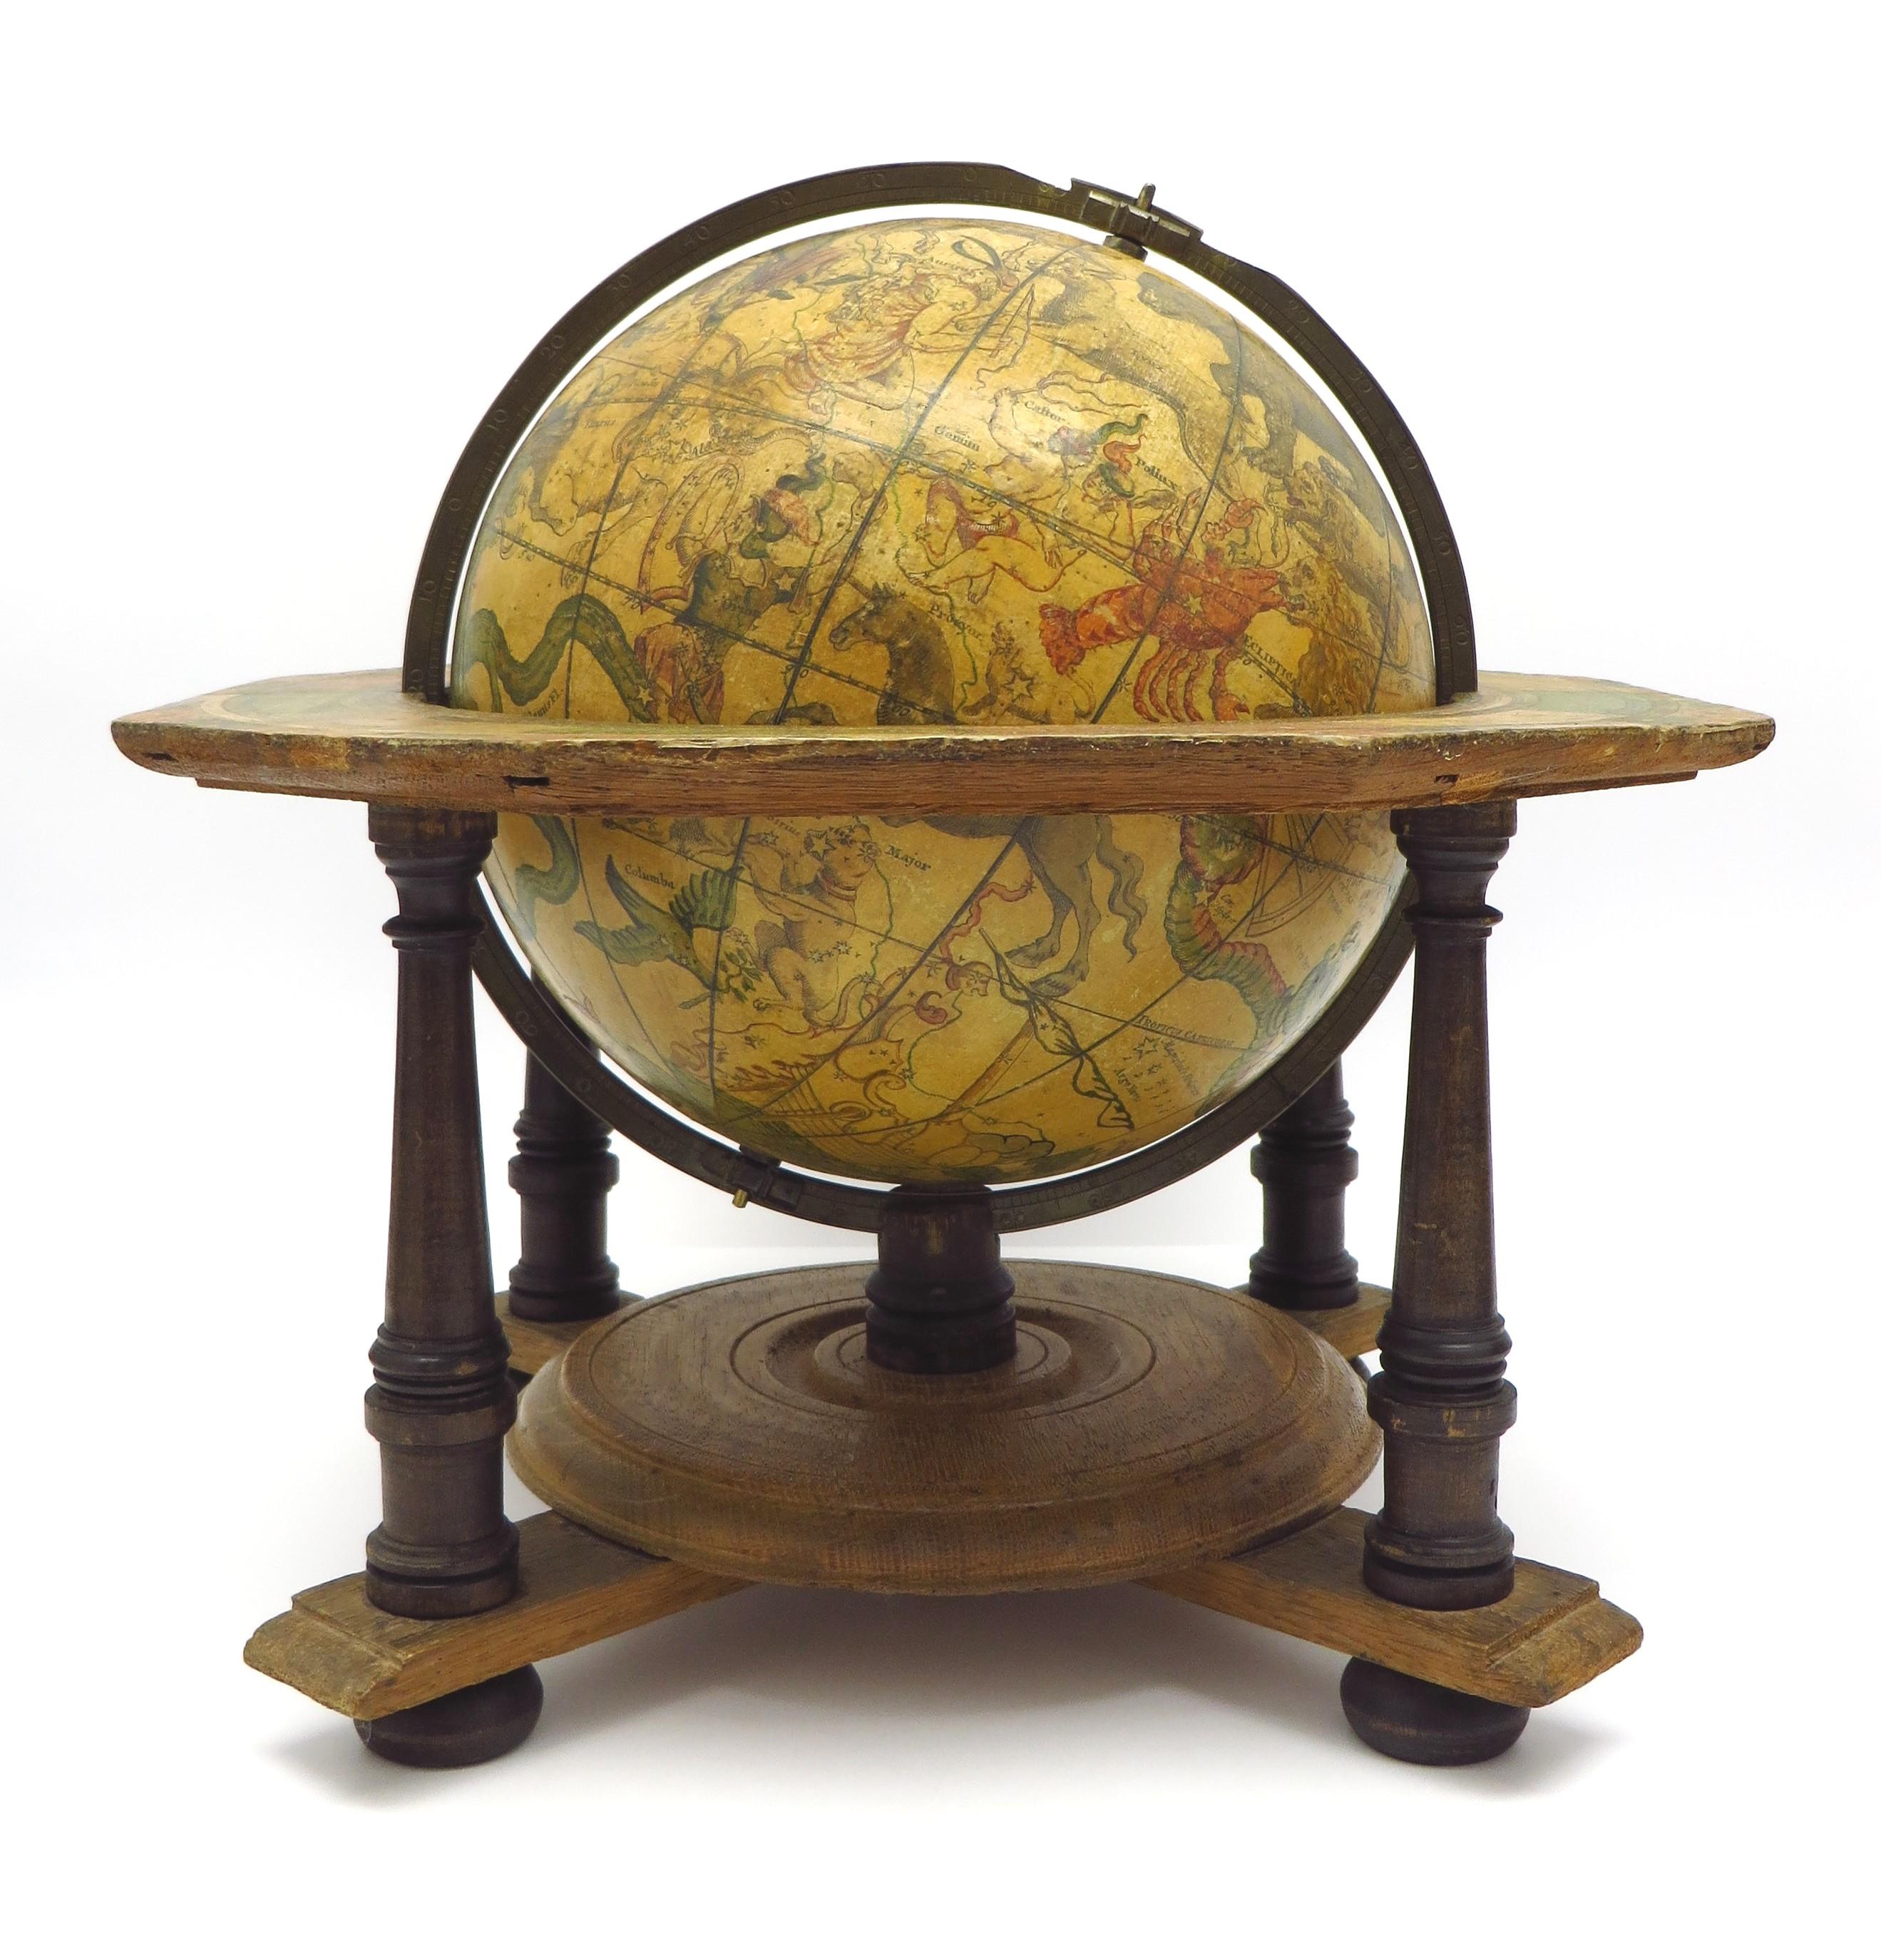 Baroque A decorative pair of rare table globes in a fine condition. For Sale